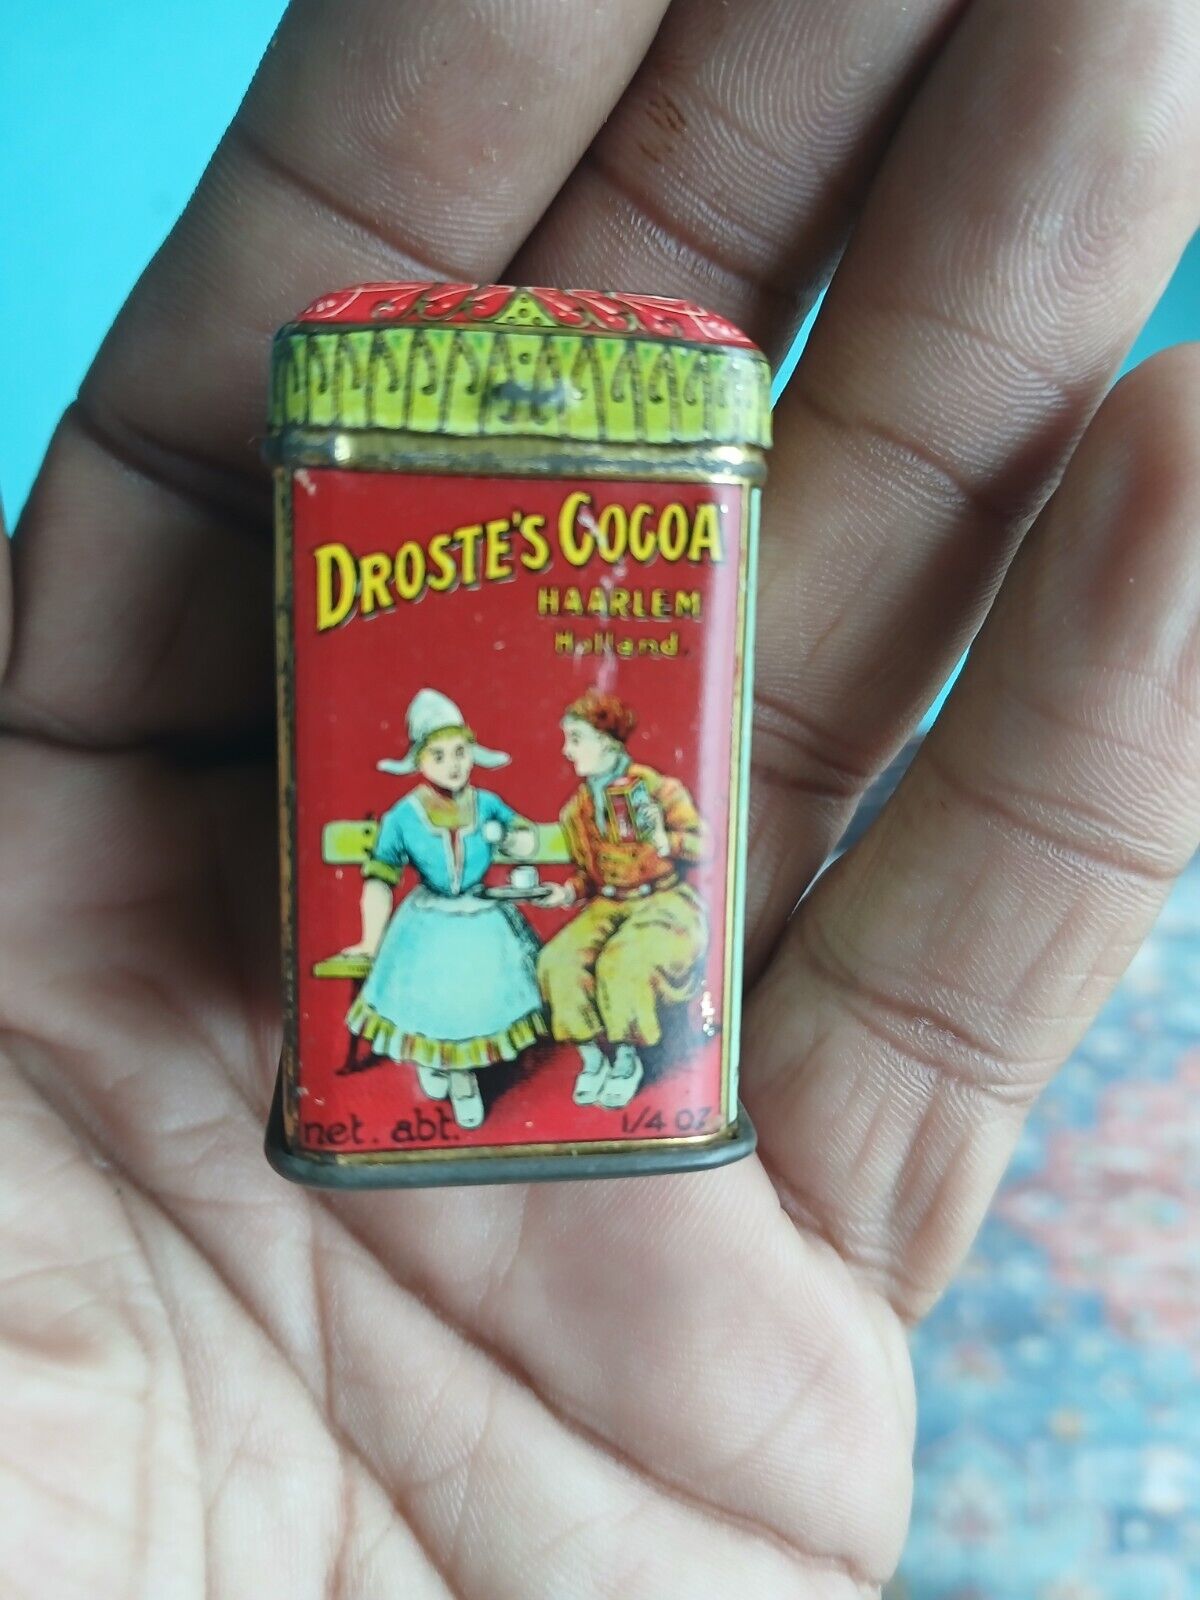 vtg Droste\'s Cocoa 1/4 oz free sample tin cocoa can 1 x 2 inches Haarlem Holland